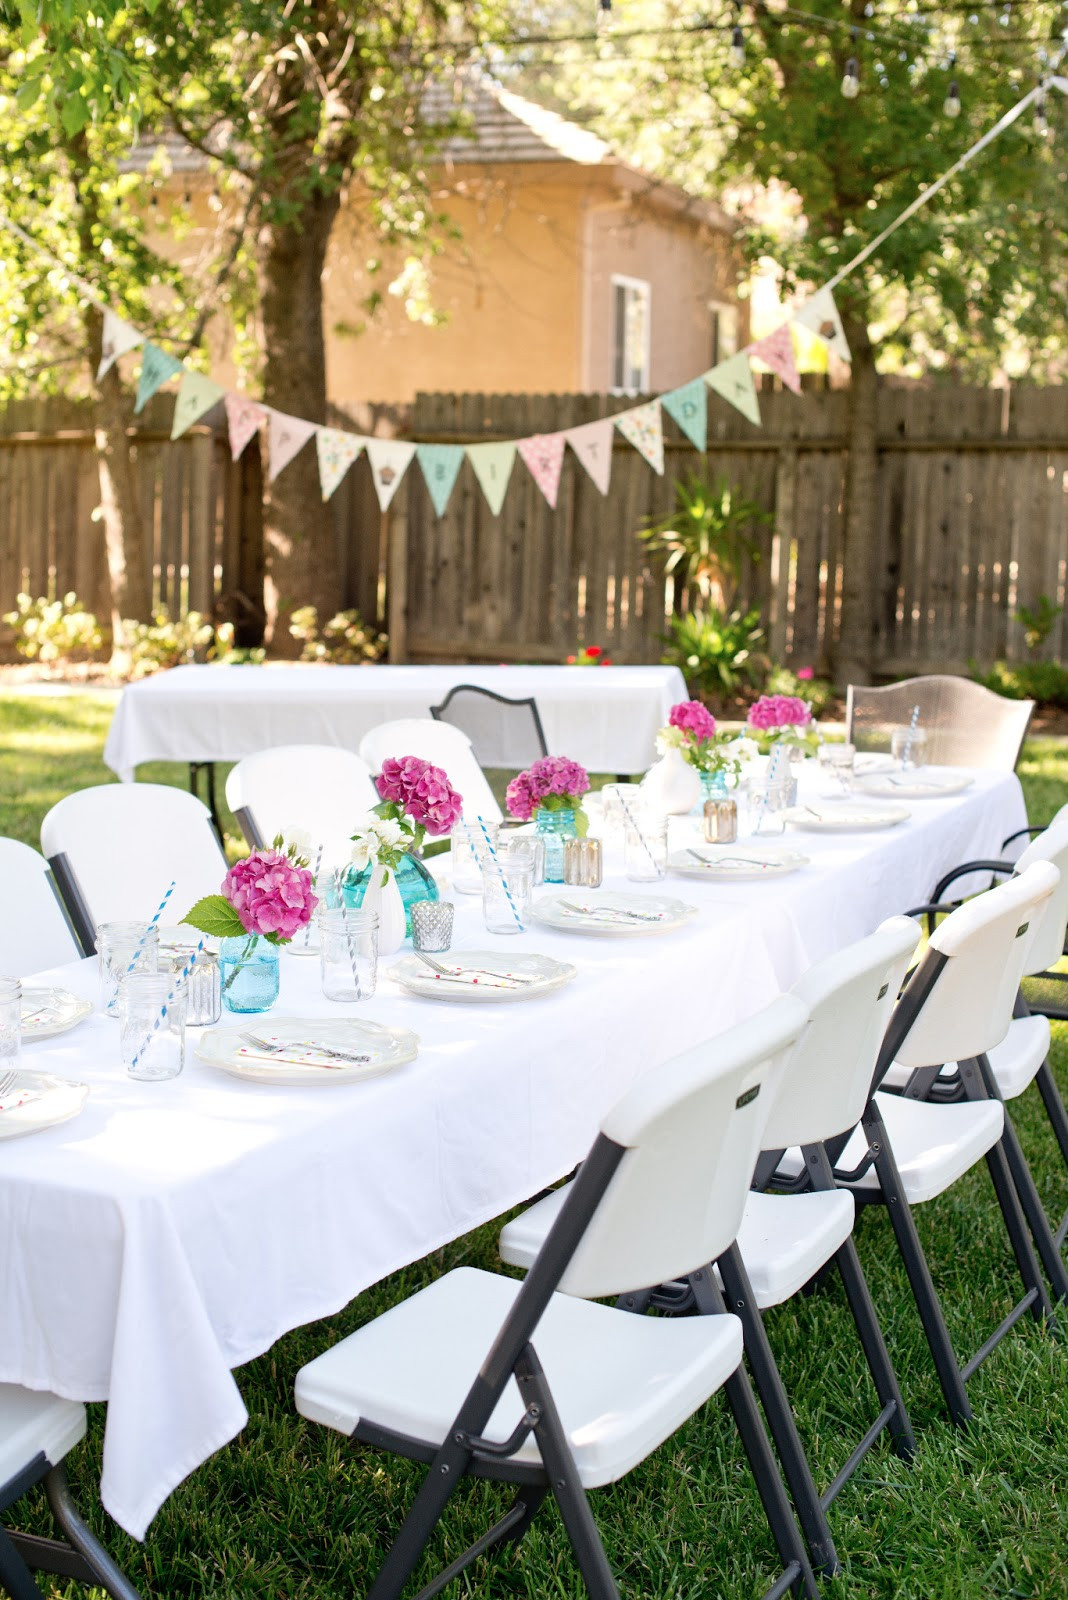 Backyard Boogie Party Ideas
 Backyard Party Decorations For Unfor table Moments